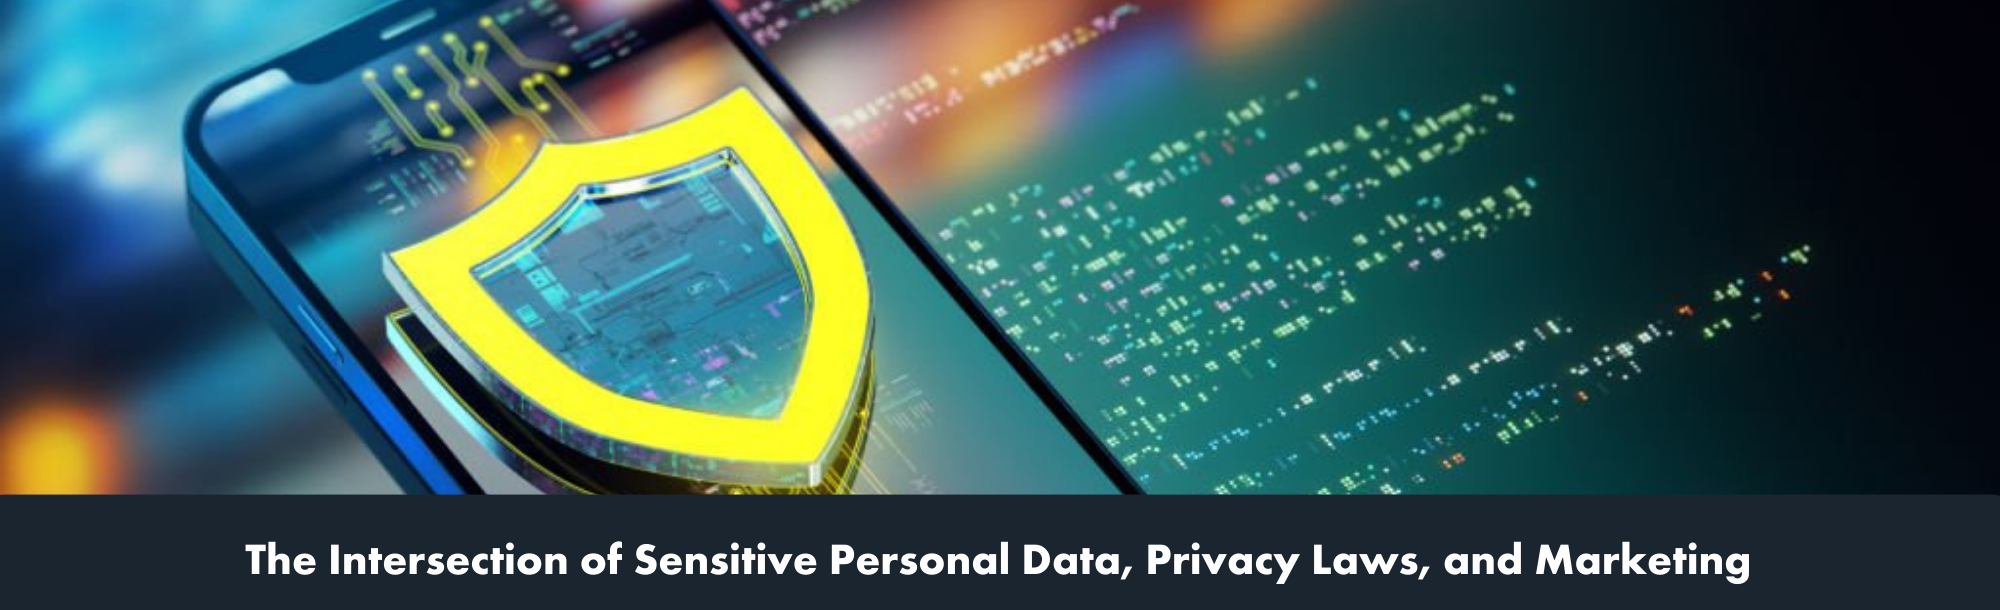 The Intersection of Sensitive Personal Data, Privacy Laws, and Marketing